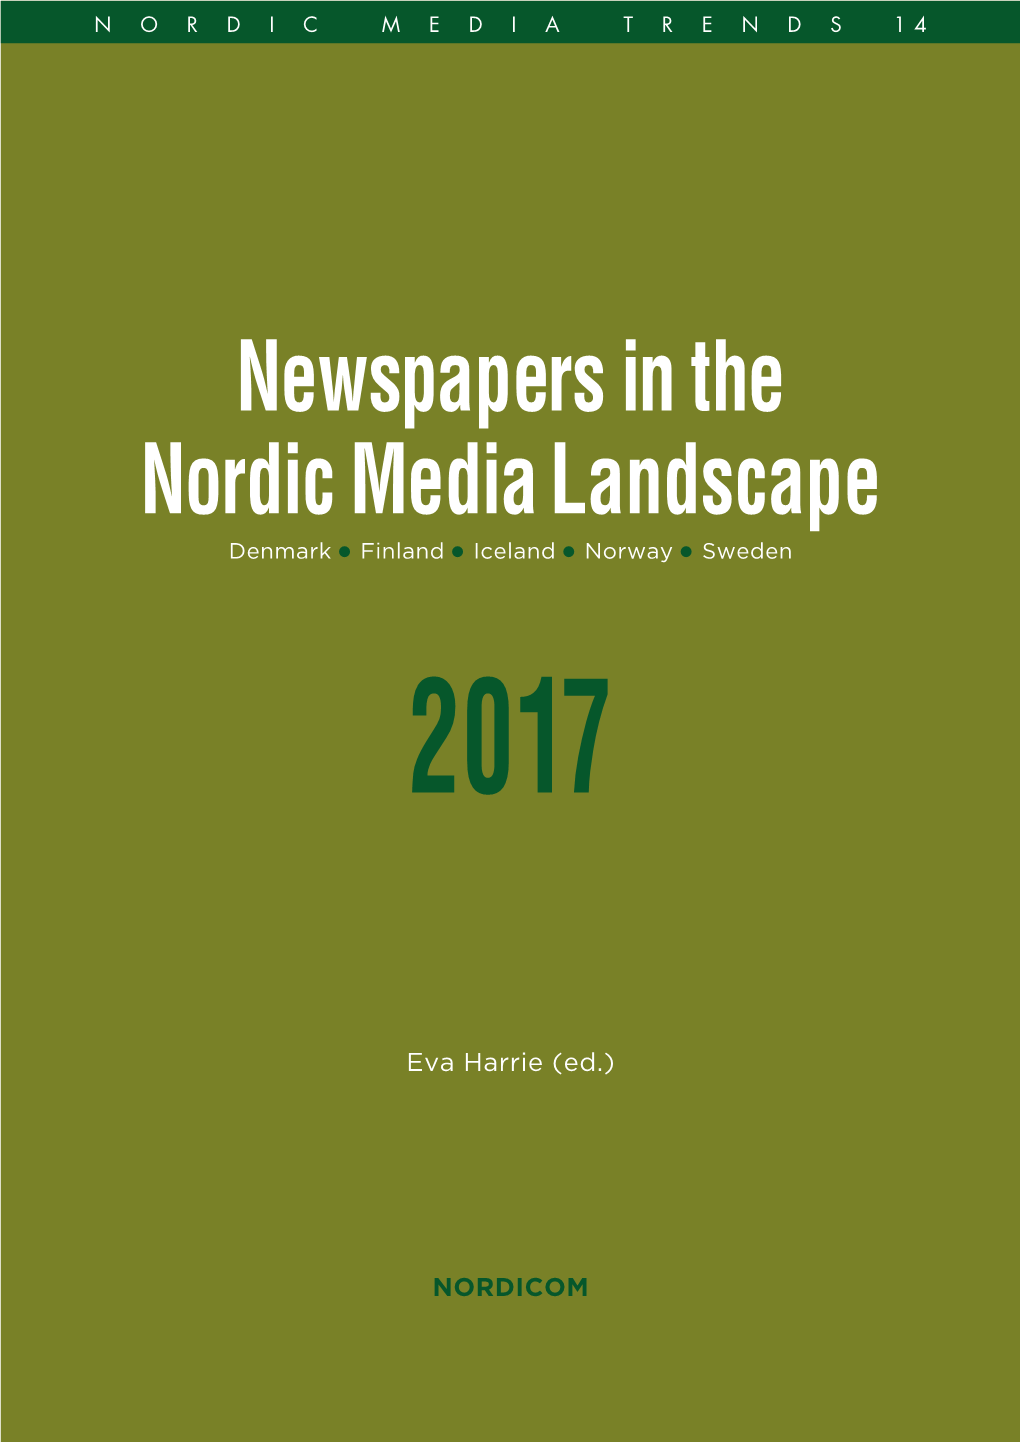 Newspapers in the Nordic Media Landscape 2017